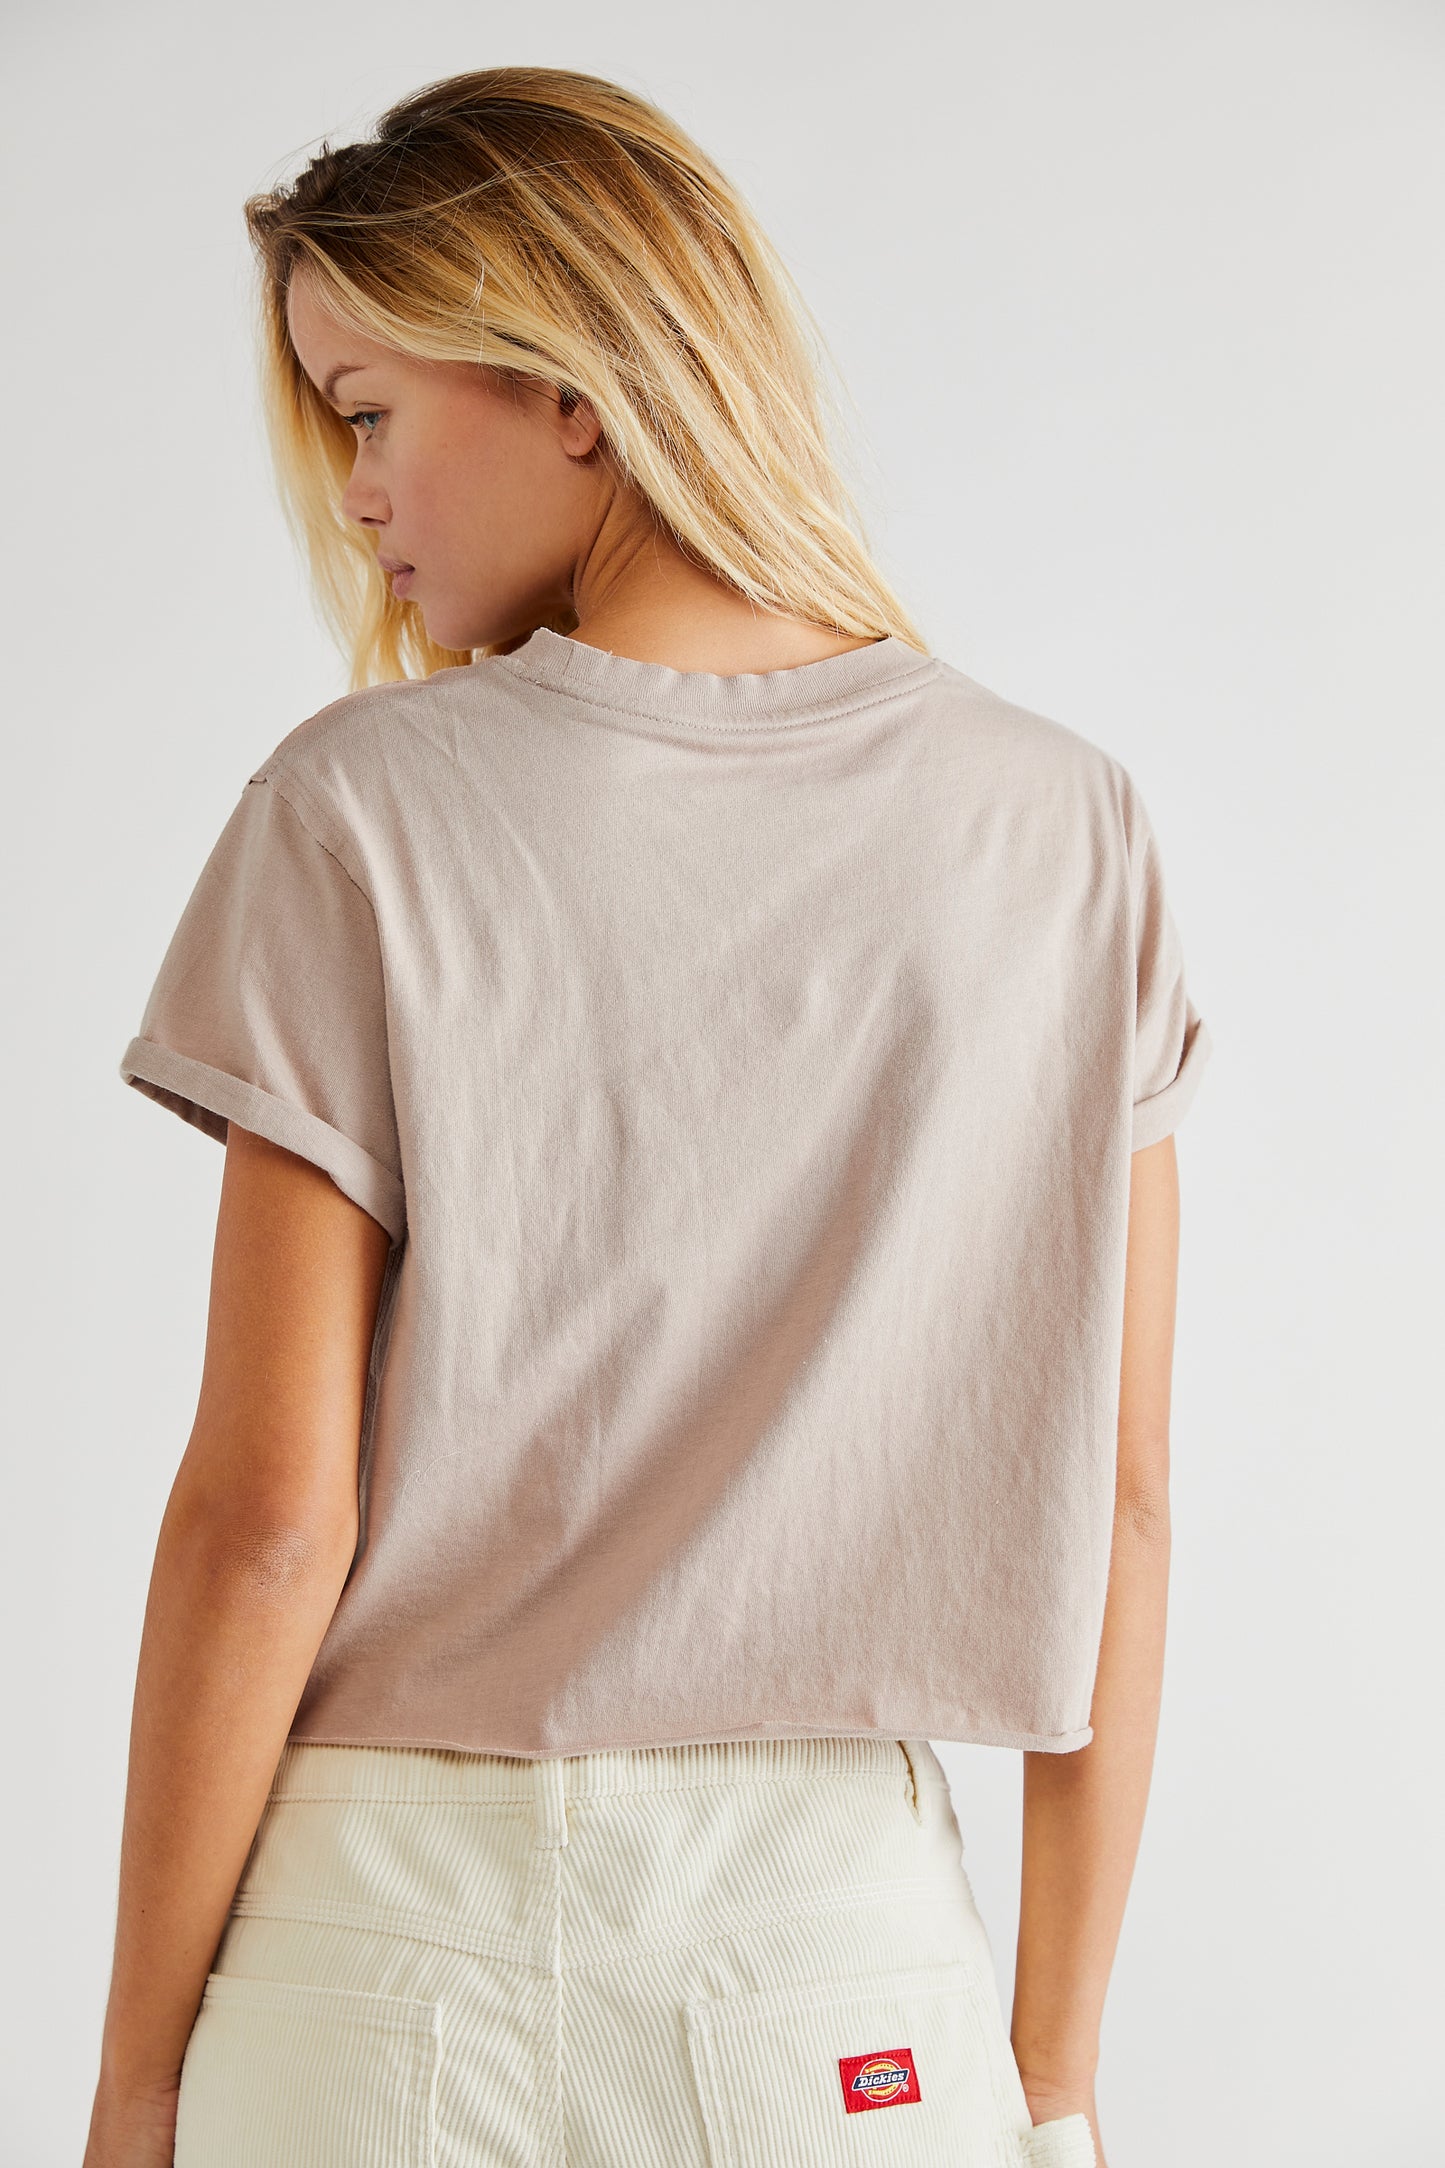 Back view of Free People's The Perfect Tee in the color Bunny